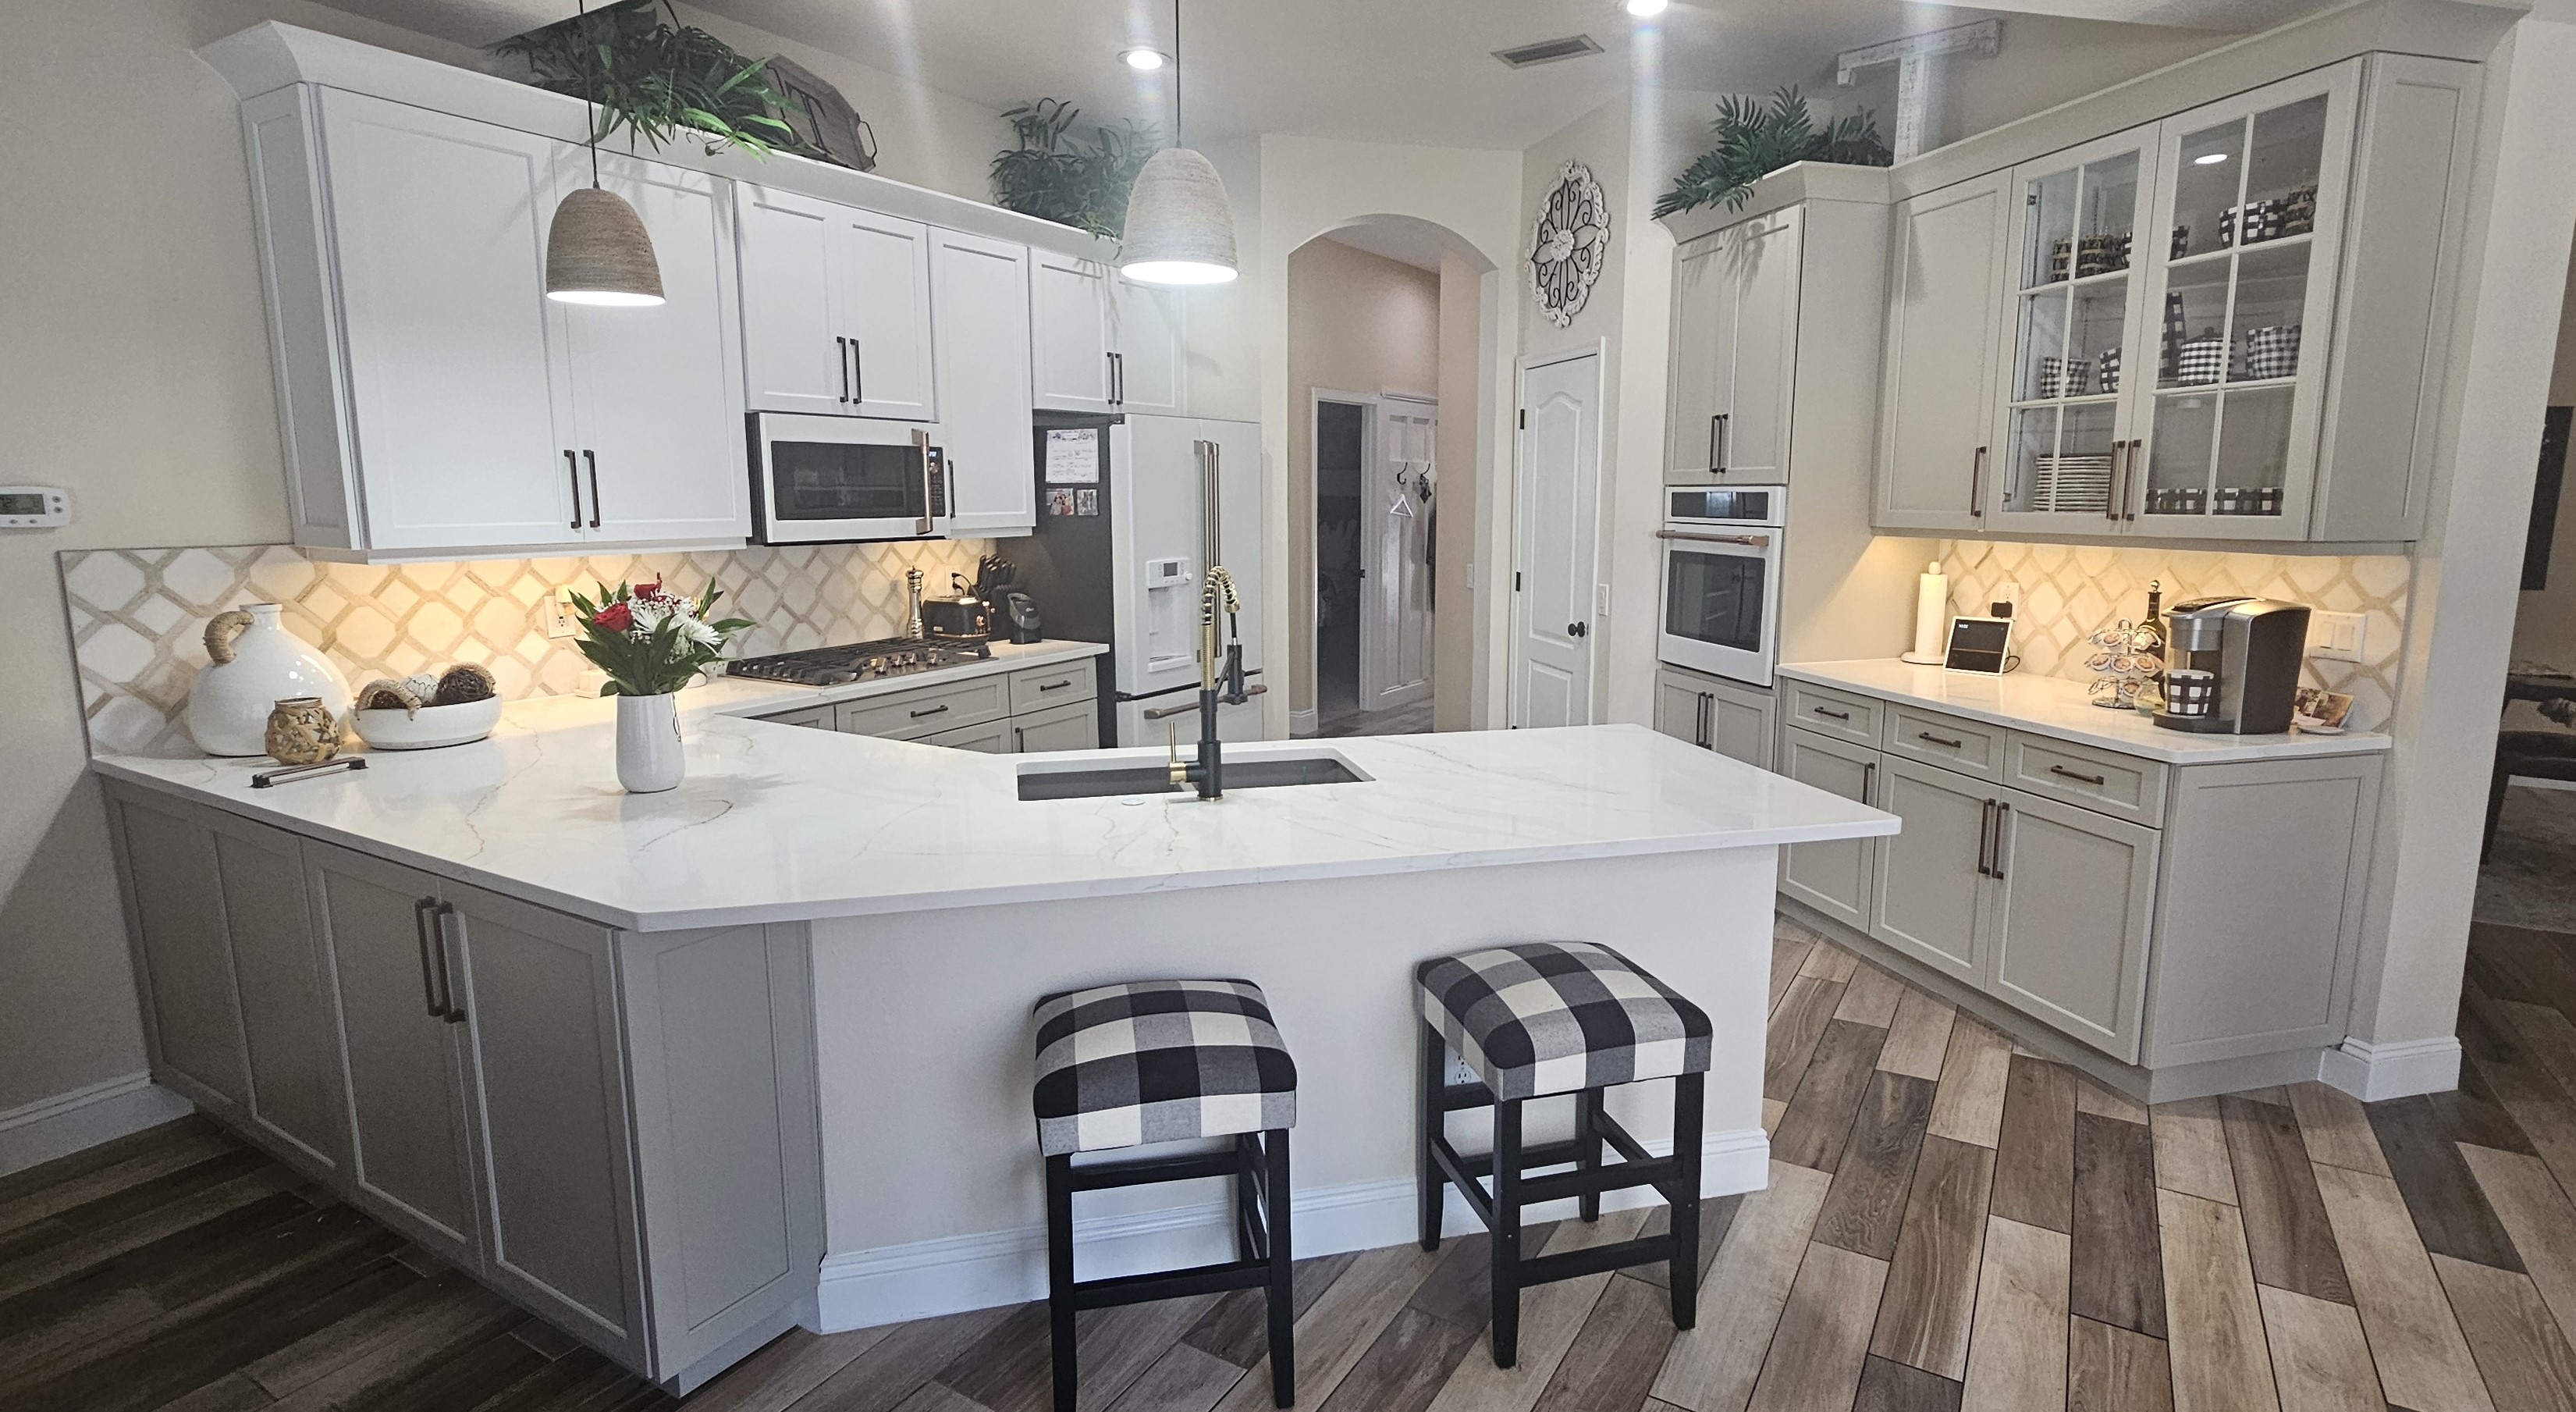 Modern appliances with a high-quality finish, granite worktops, and sleek white kitchen cabinets in Odessa.